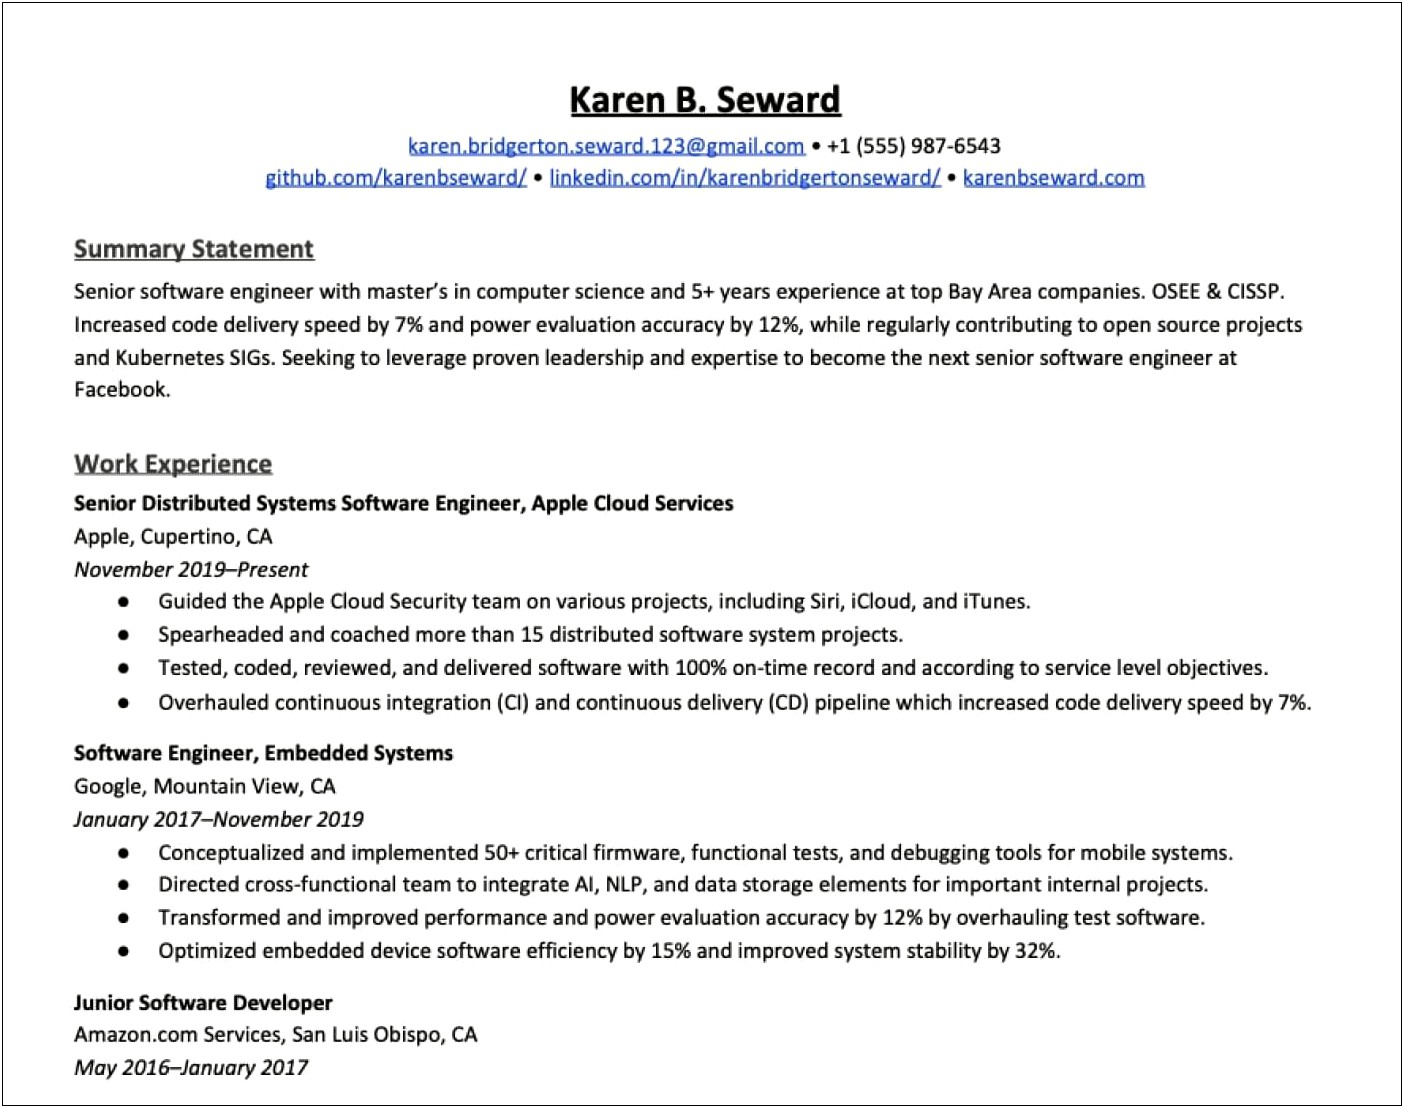 Software Test Engineer Resume 5 Years Experience